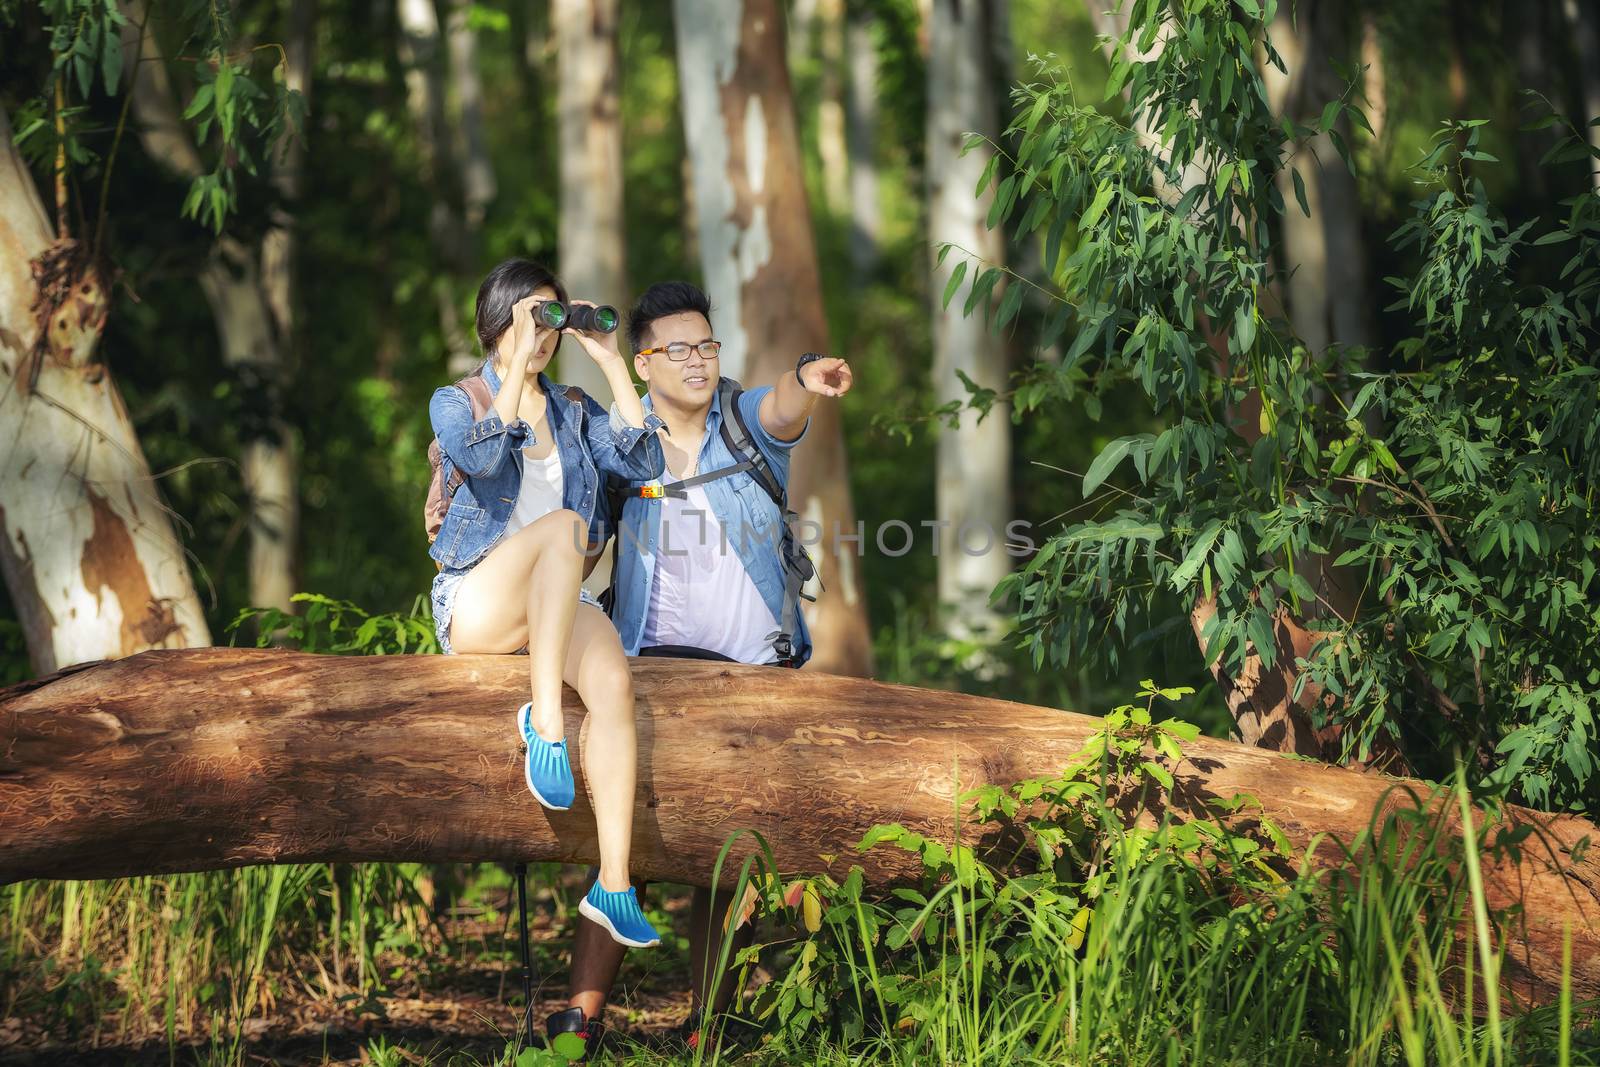 Young people are looking through binoculars with concentration while in the forest. Hiking concept, Travel concept.